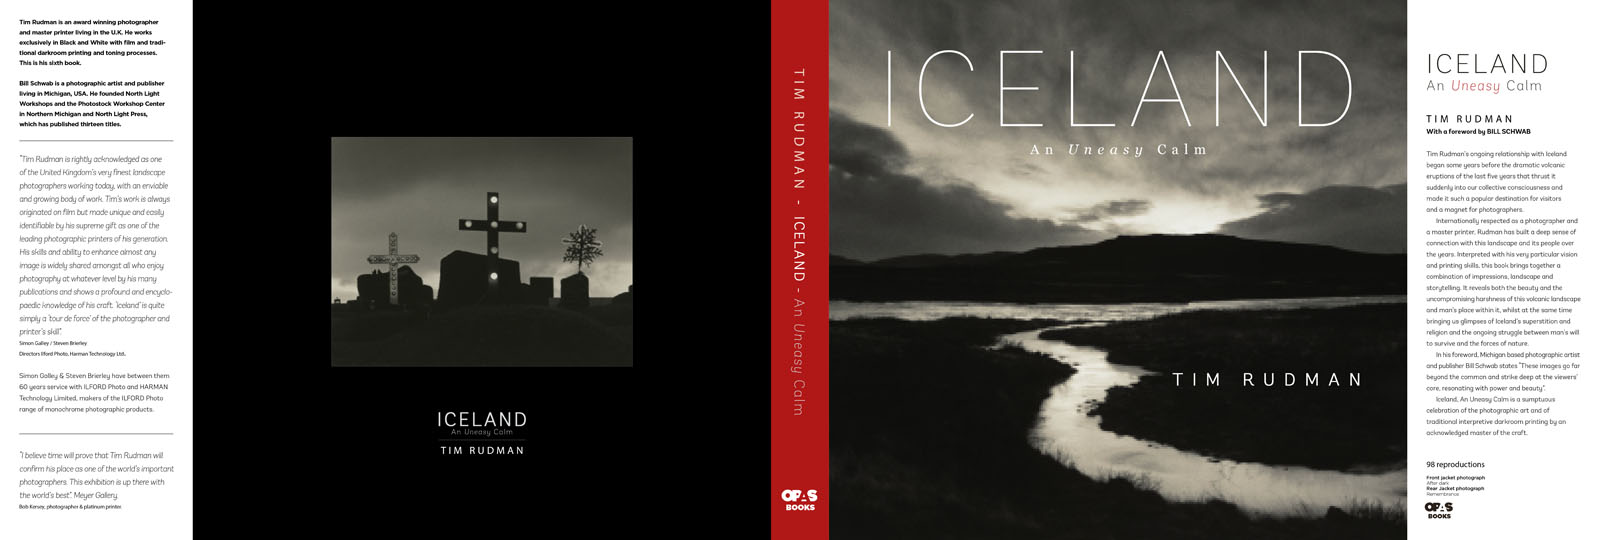 Iceland, An Uneasy Calm dust jacket